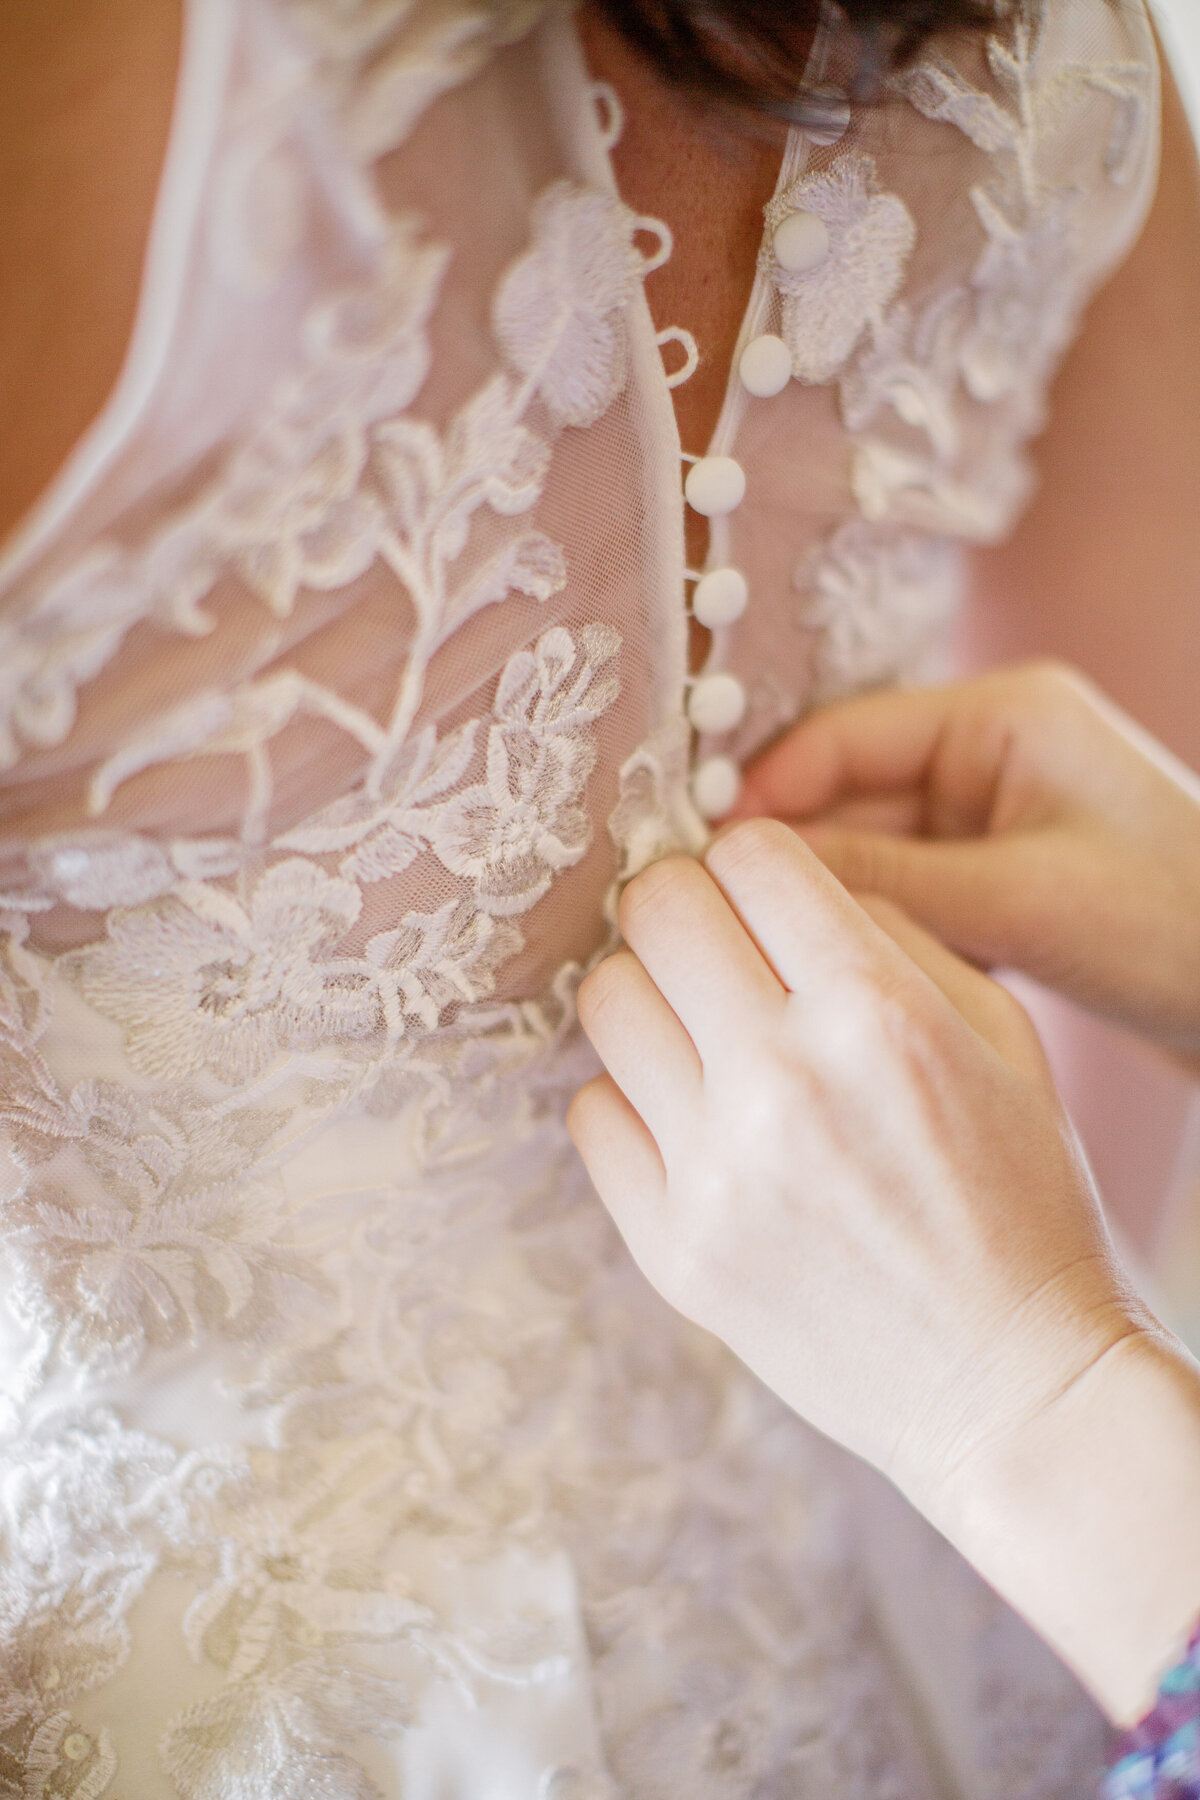 bridal dress being buttoned